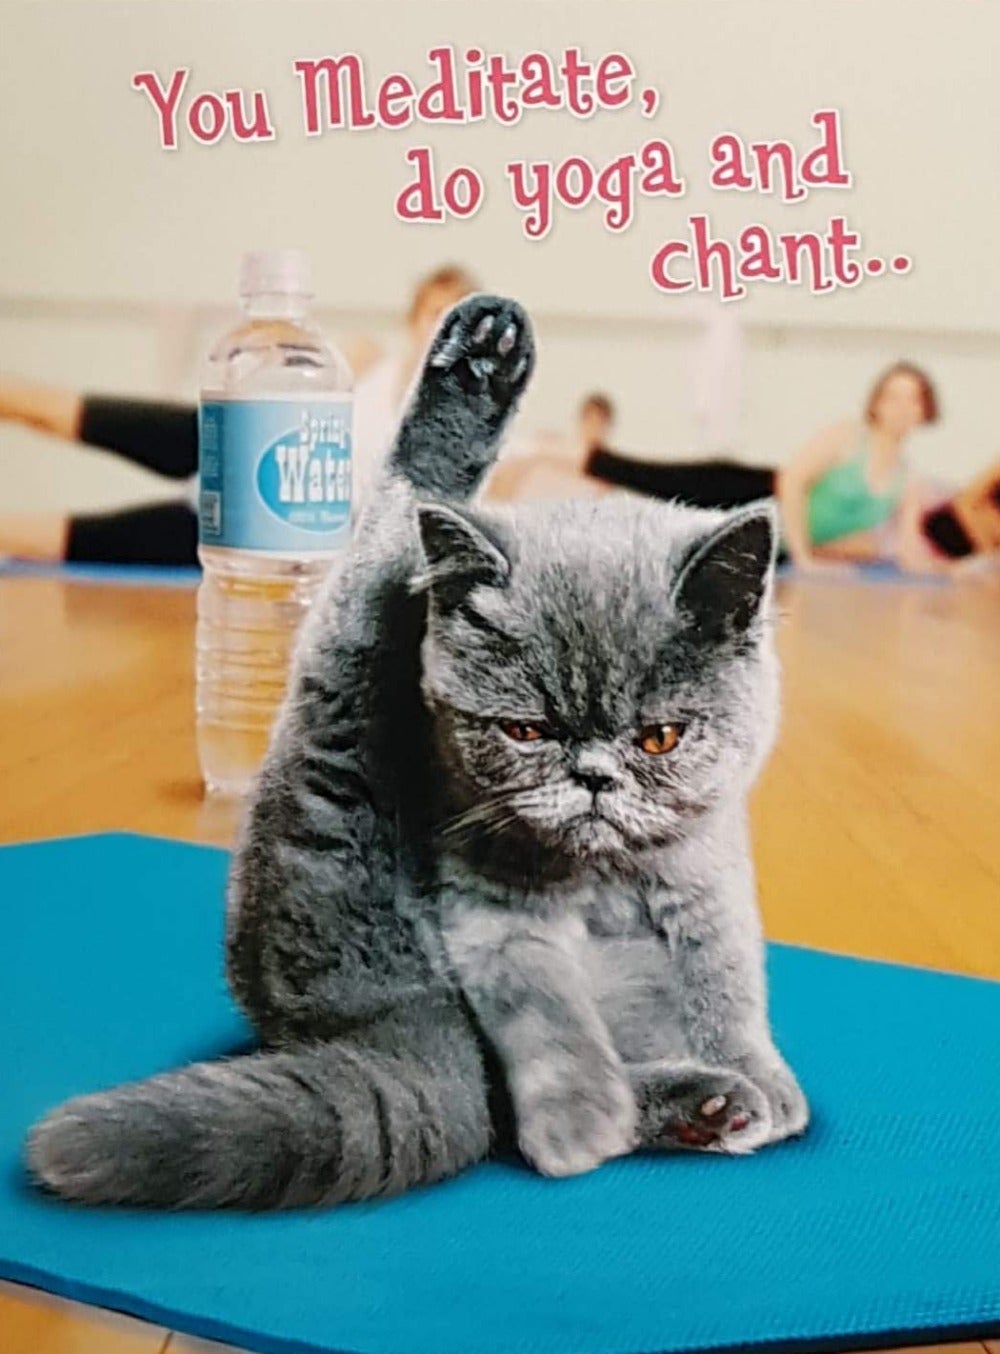 Birthday Card - Humour / Cat Ready For Yoga Excercises